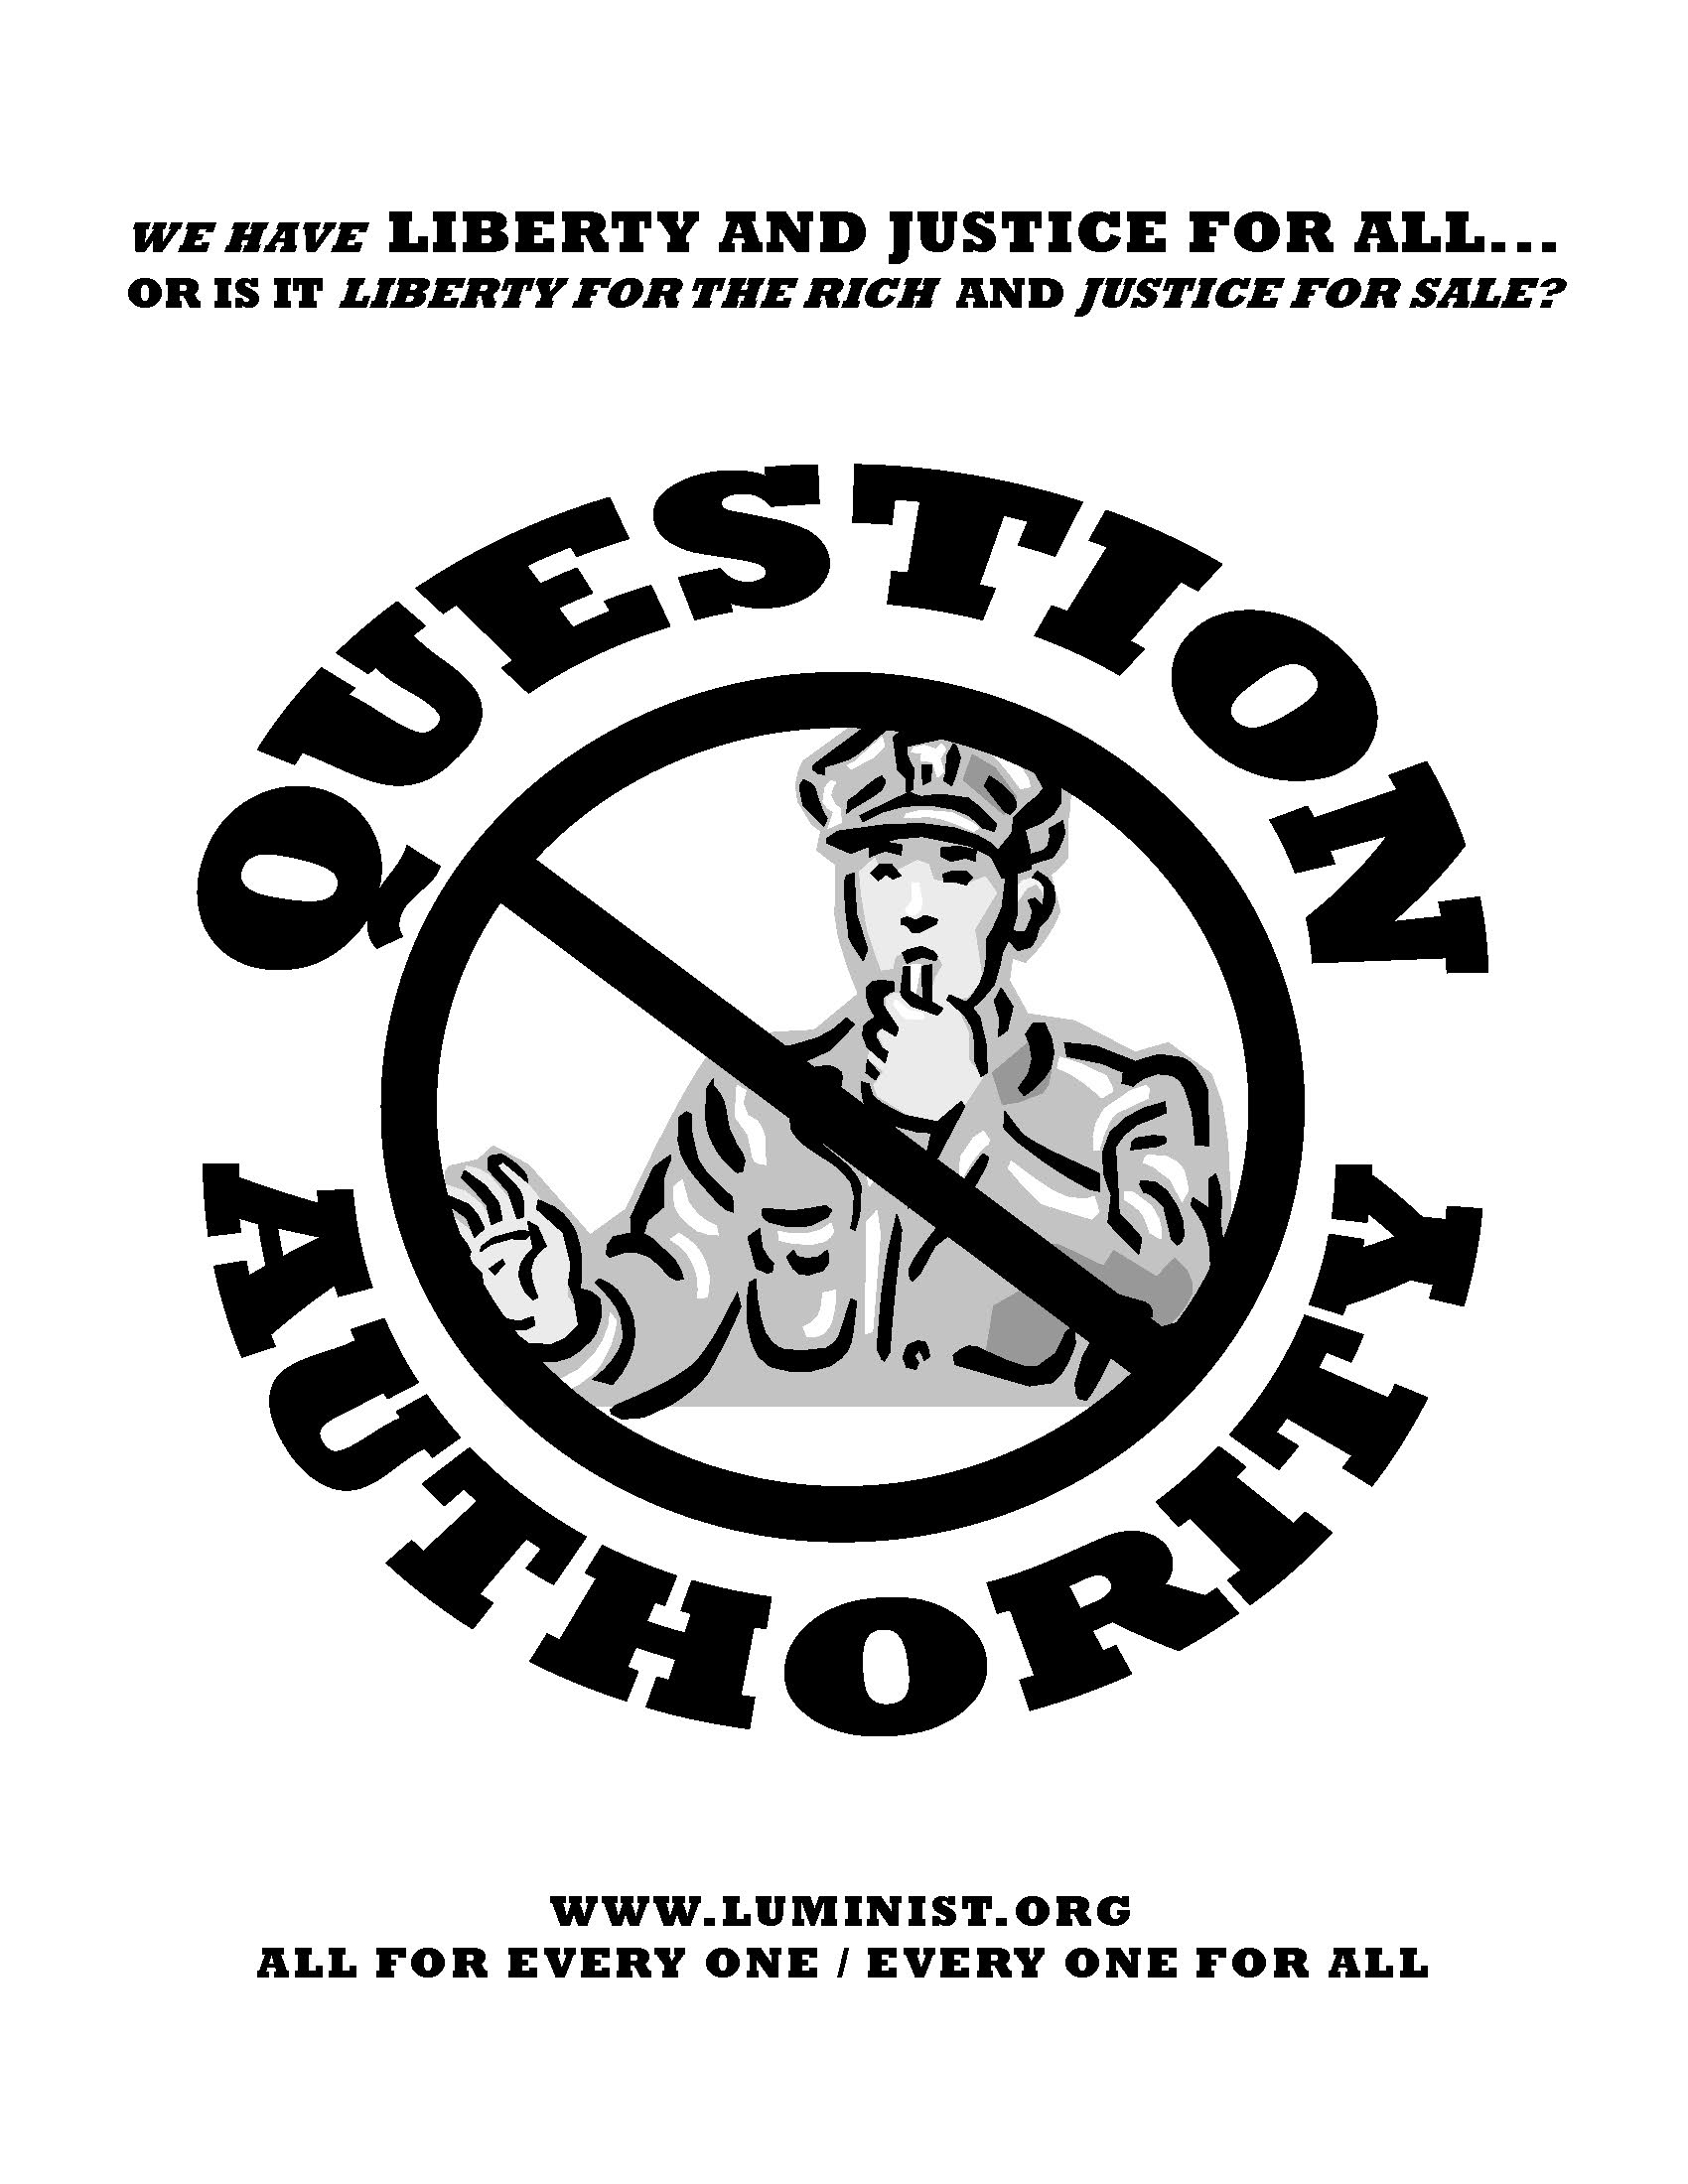 Question authority - think for yourself